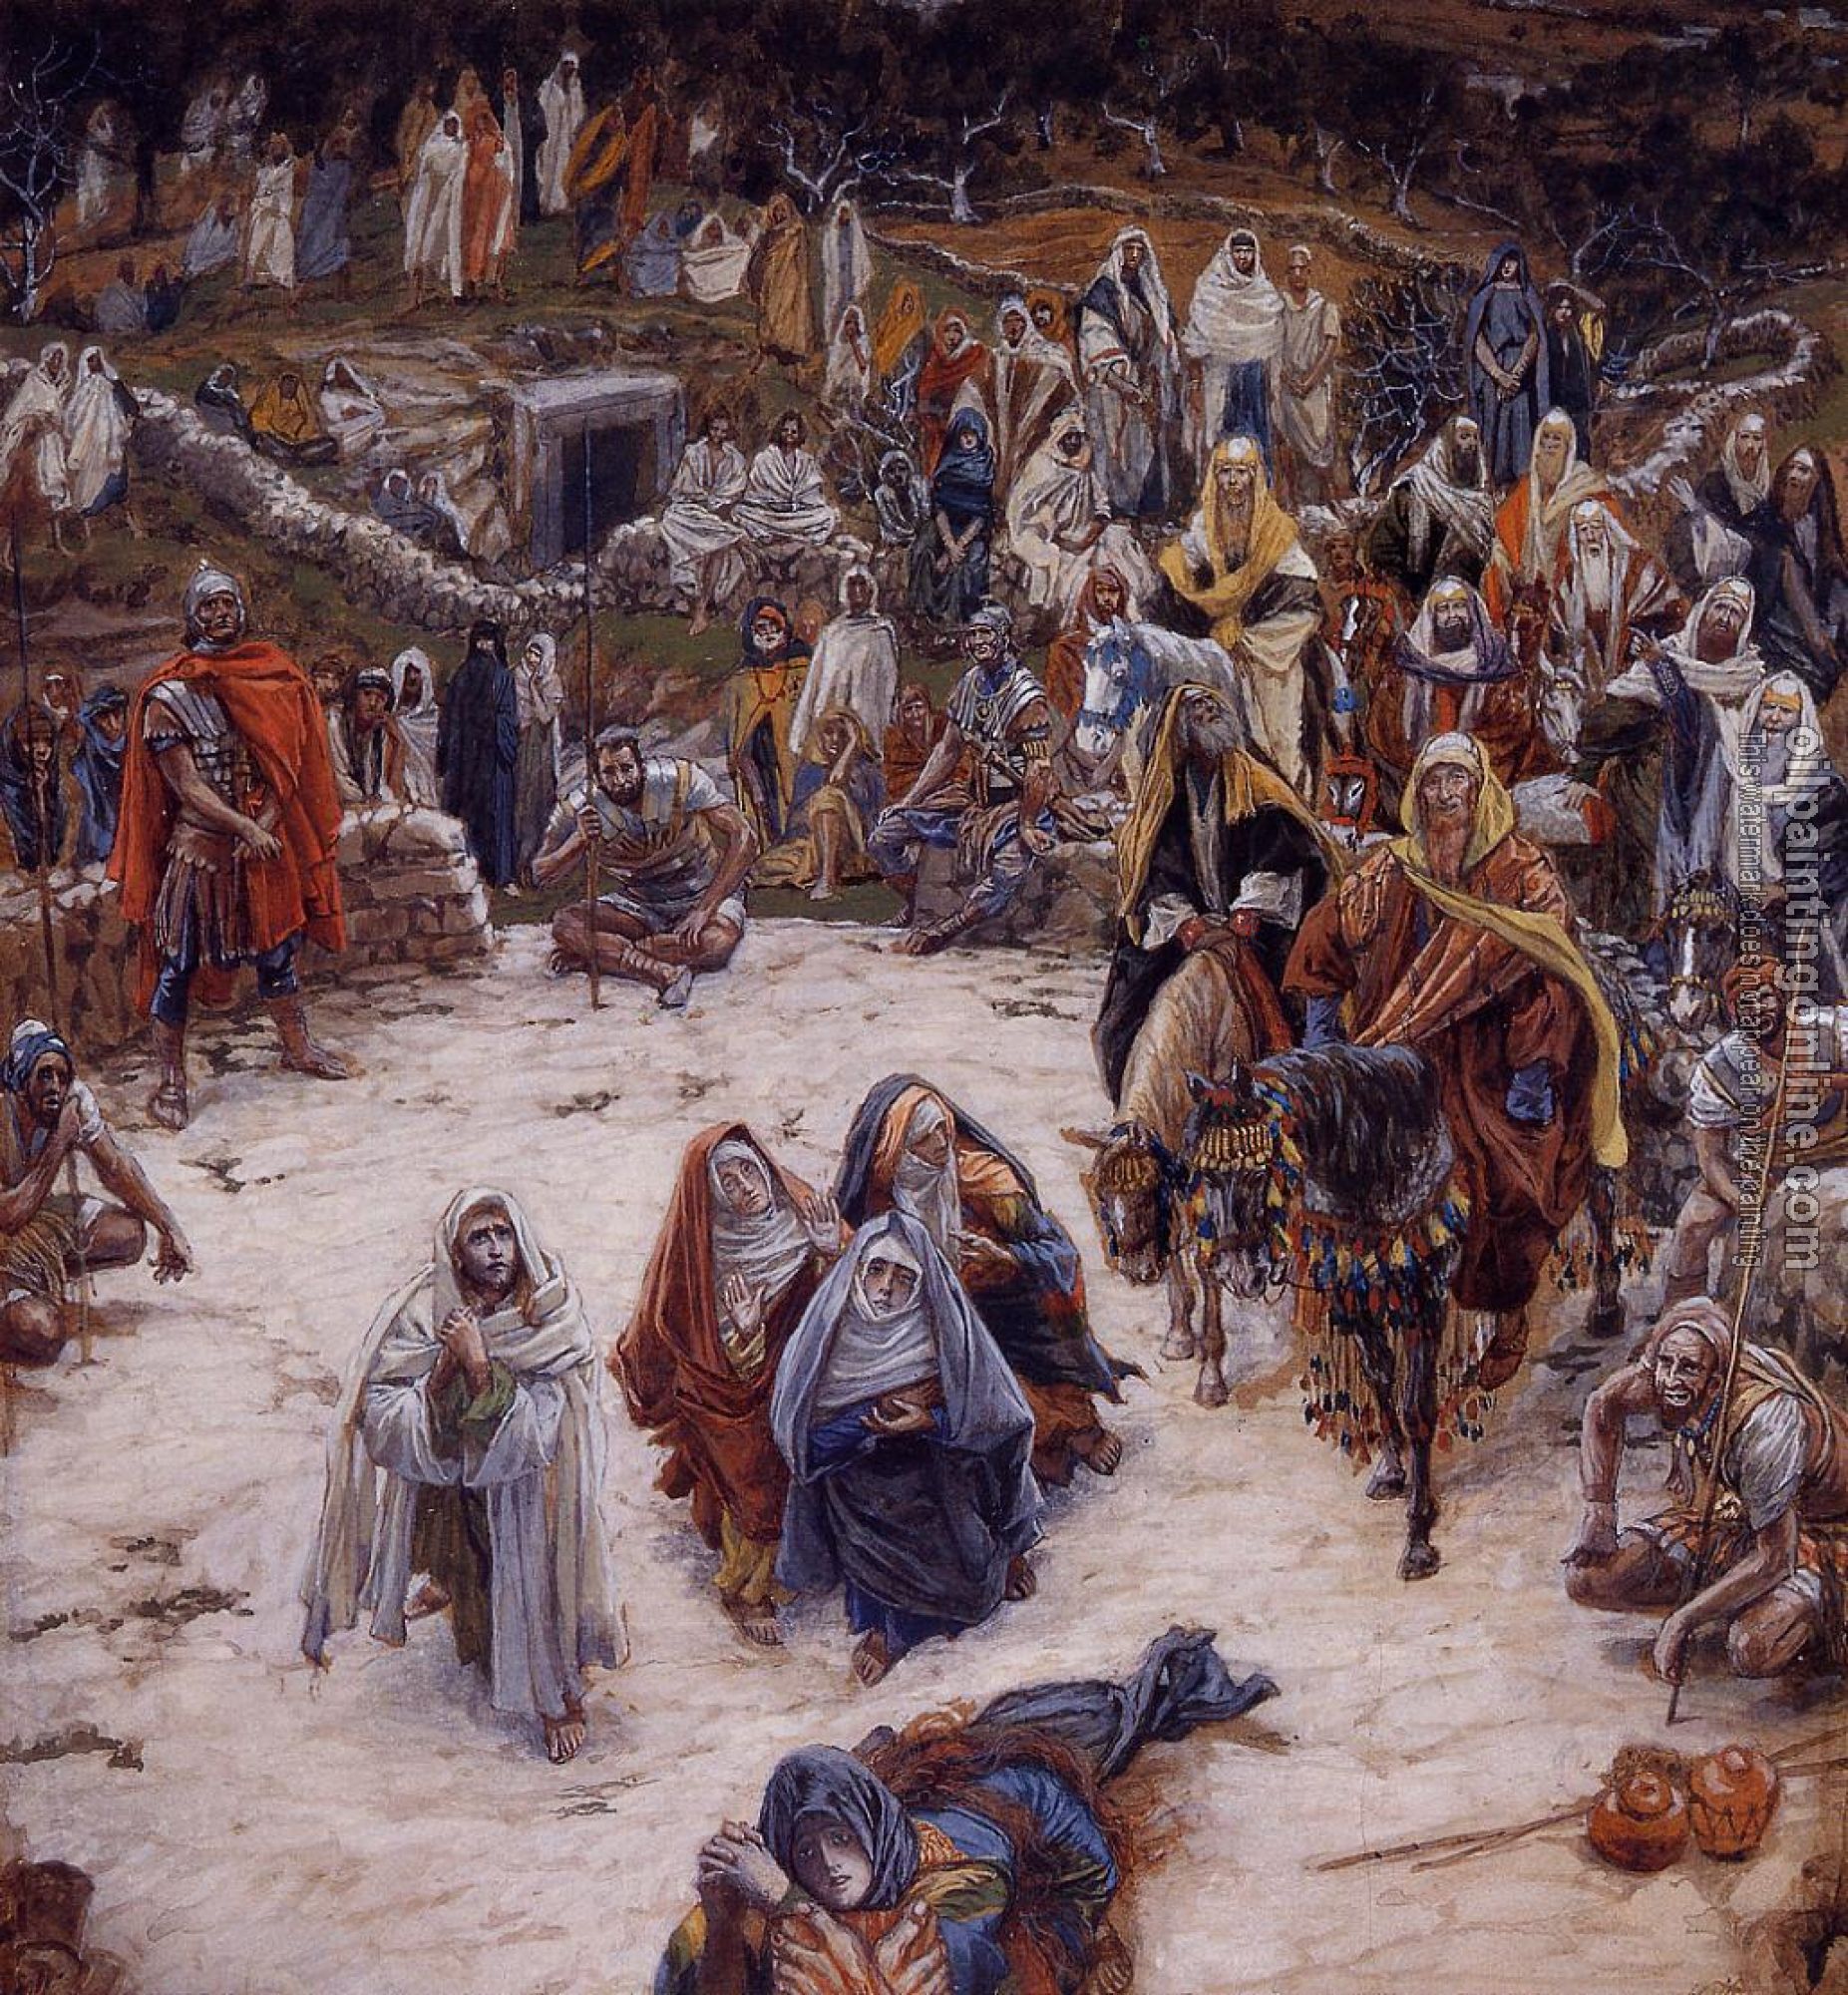 Tissot, James - What Our Saviour Saw from the Cross